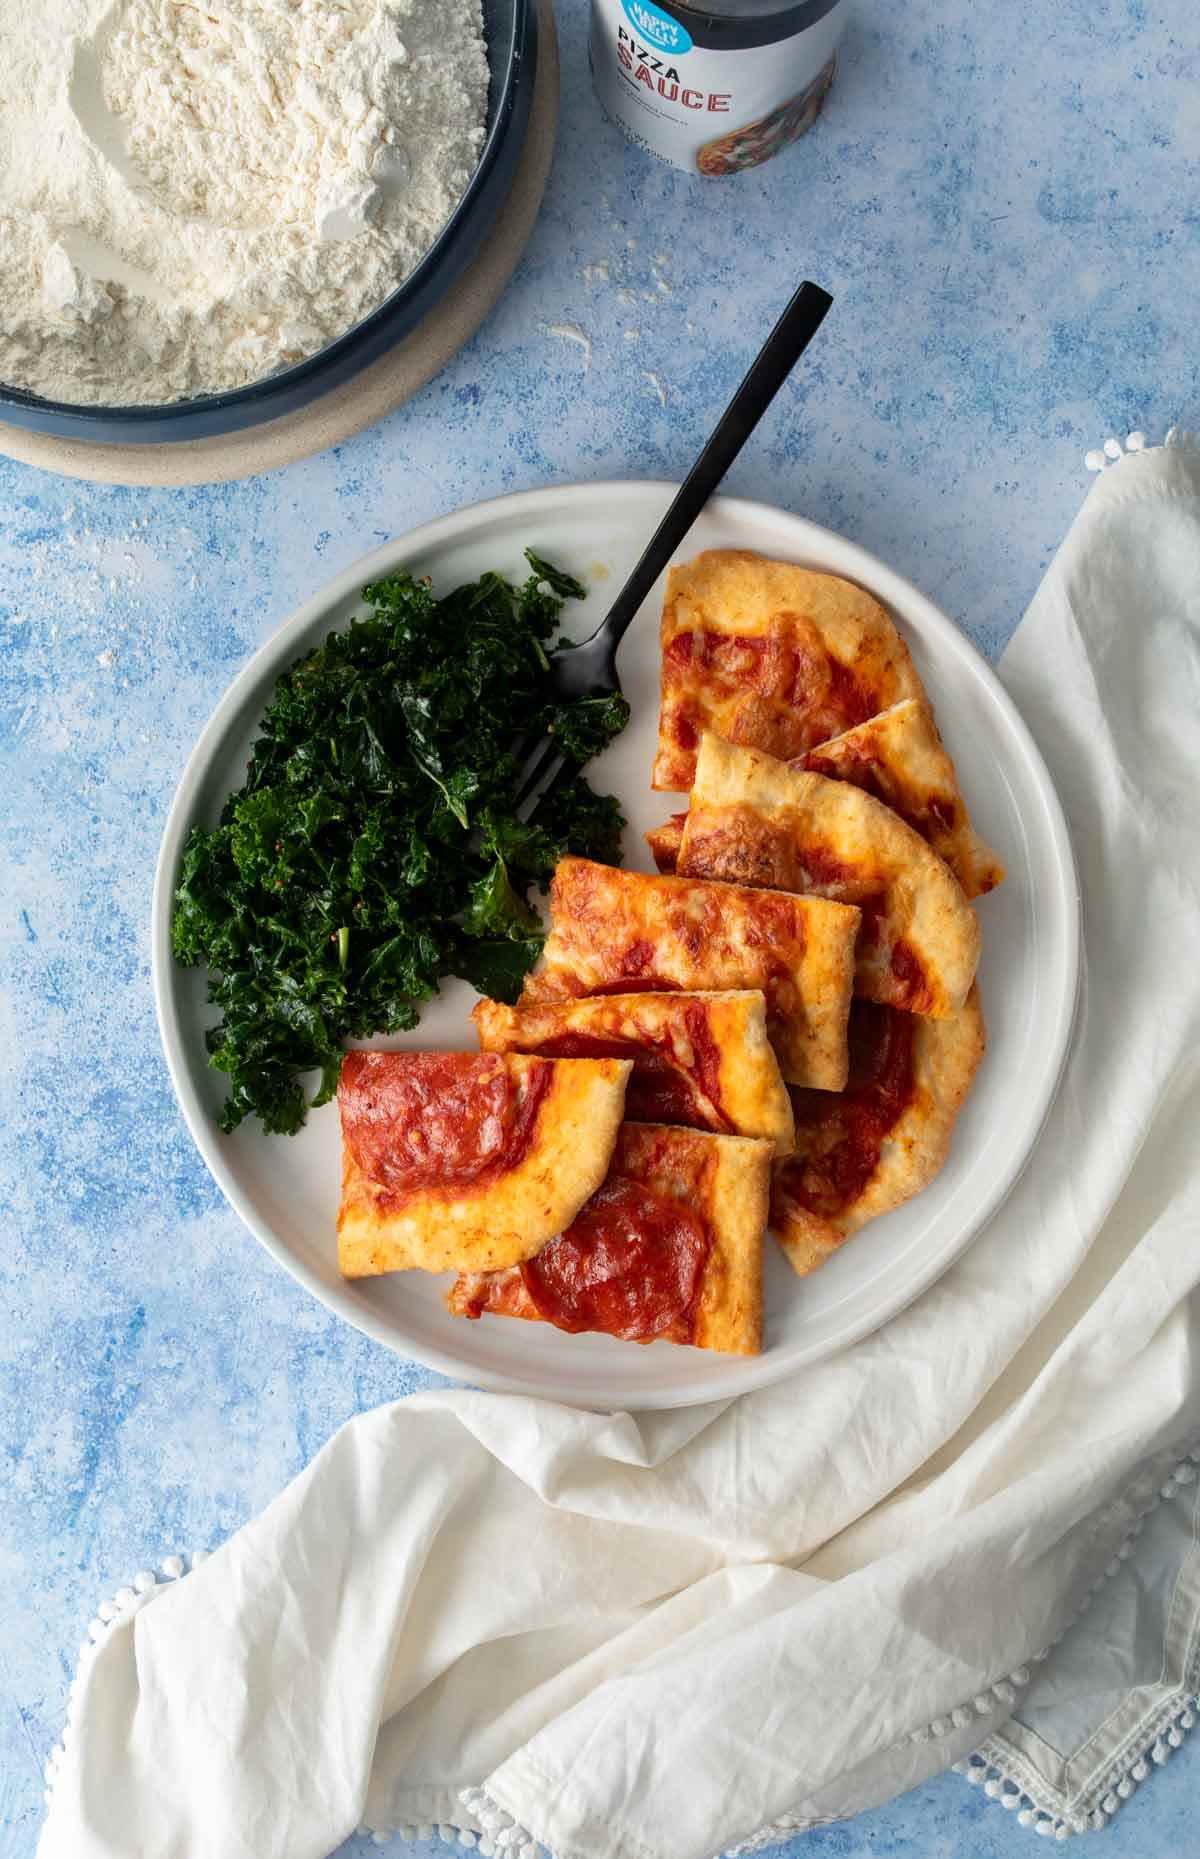 pepperoni pizza slices and kale salad on plate